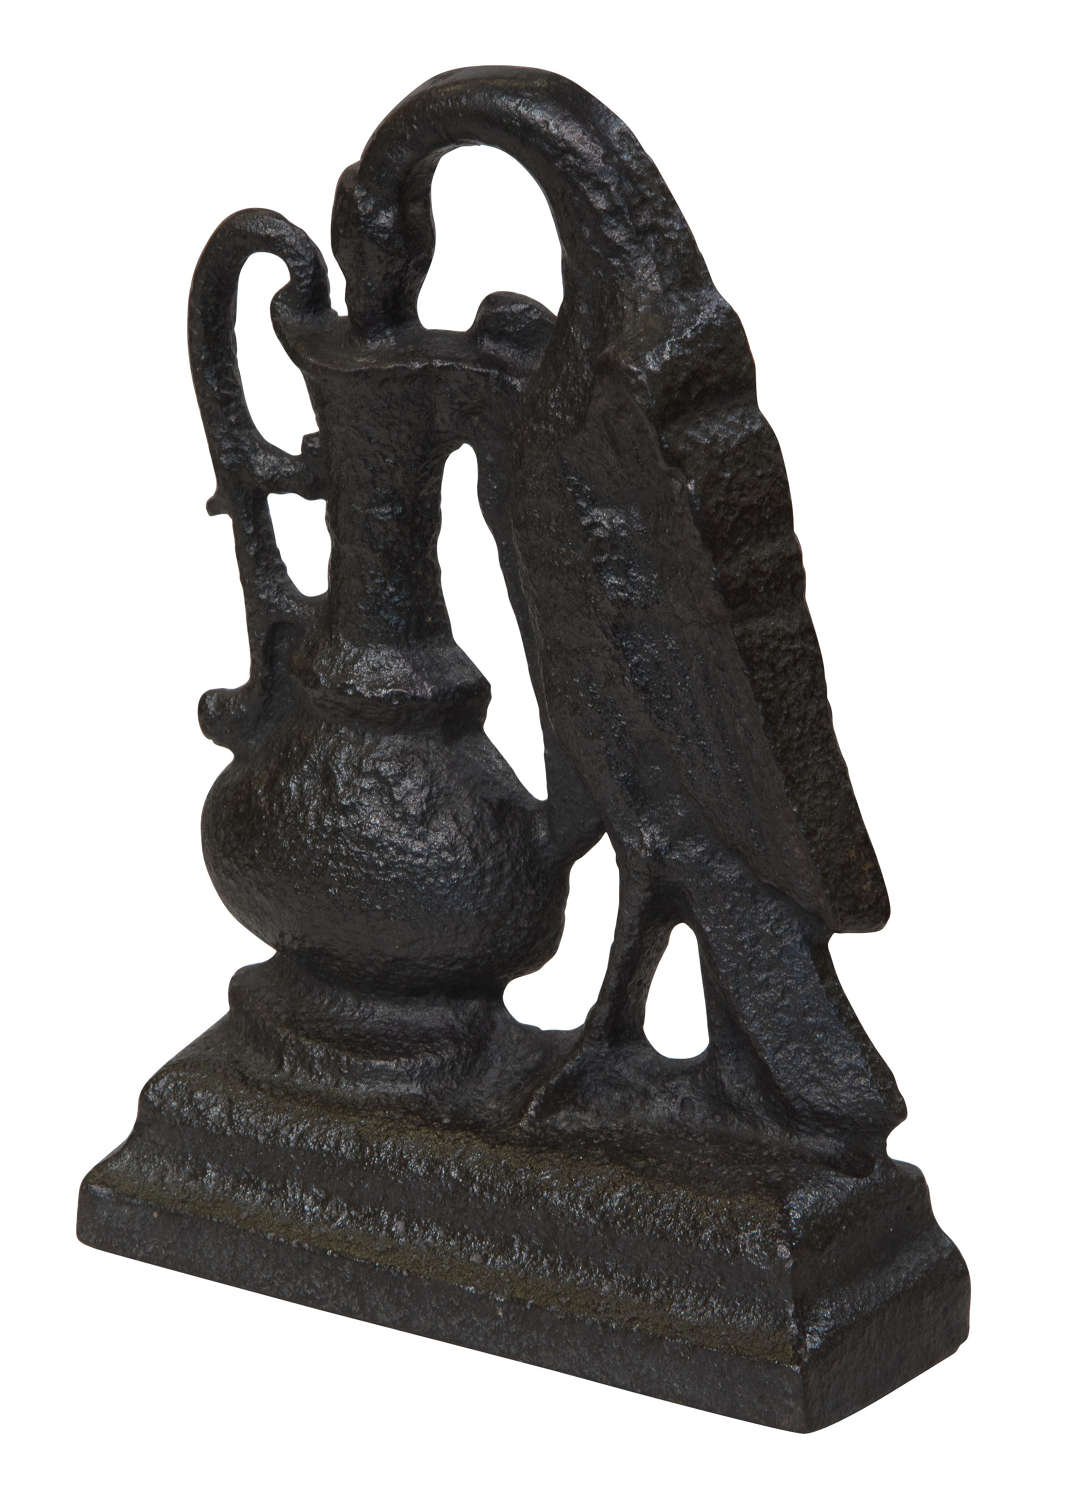 19thC cast iron doorstop depicting the stork from Aesop's fable c1860